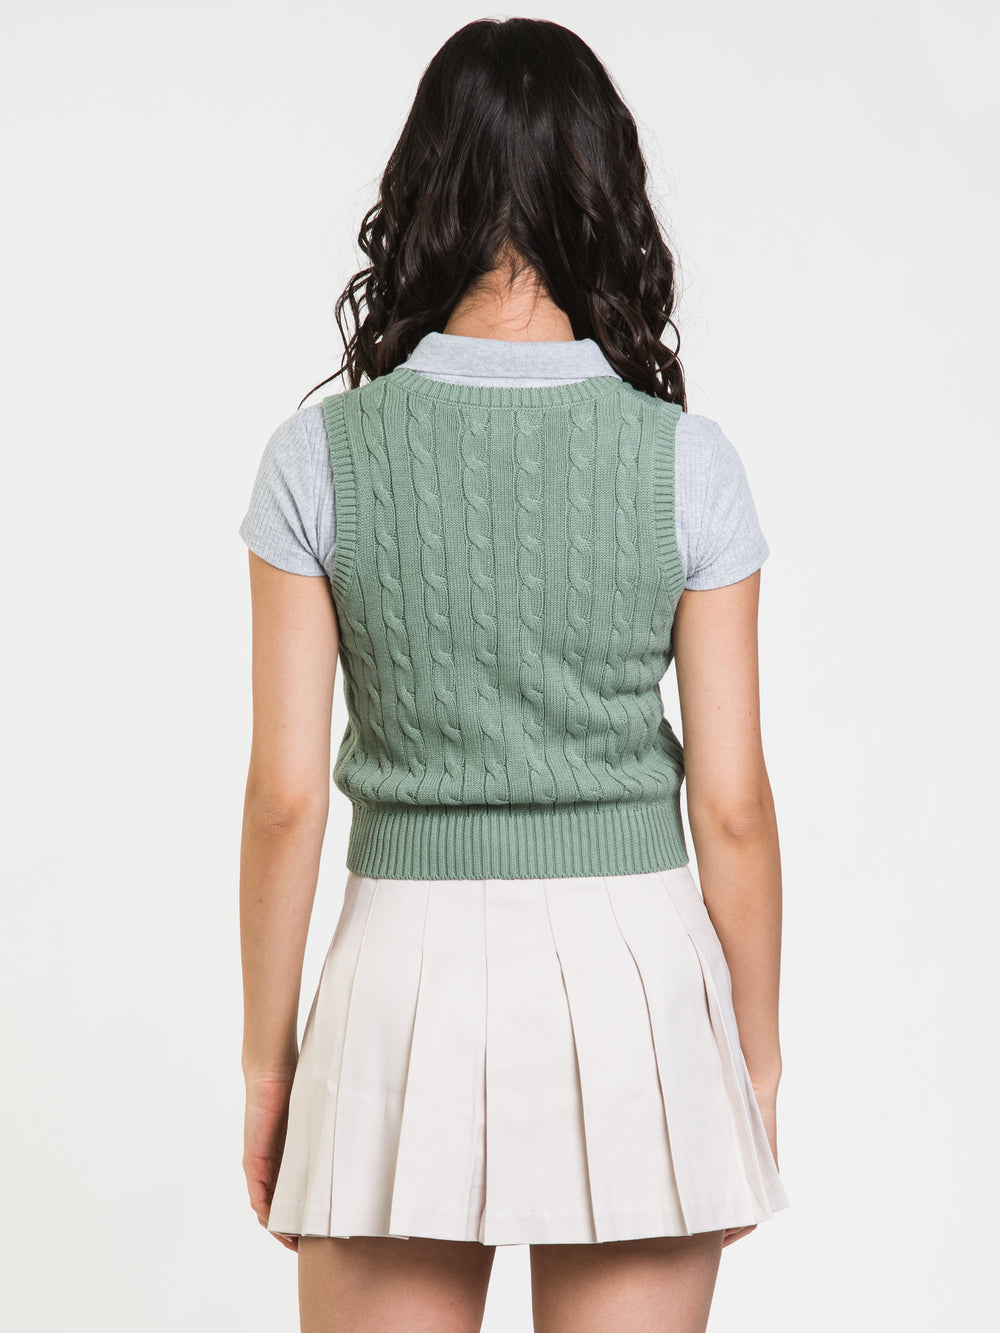 HARLOW HALLE CABLE VEST - CLEARANCE